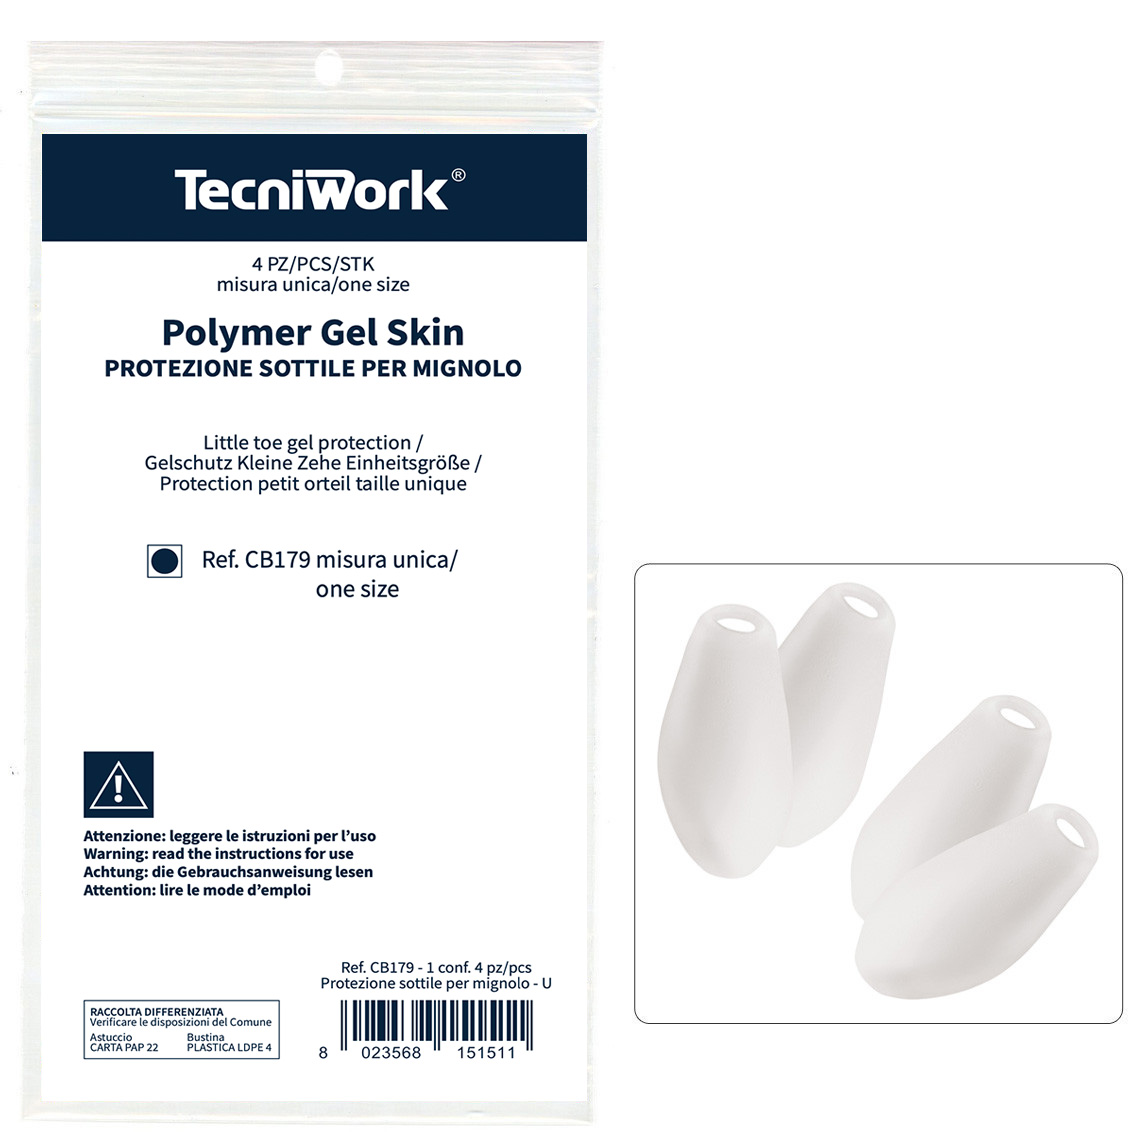 Thin little toe protection made of transparent Tecniwork Polymer Gel